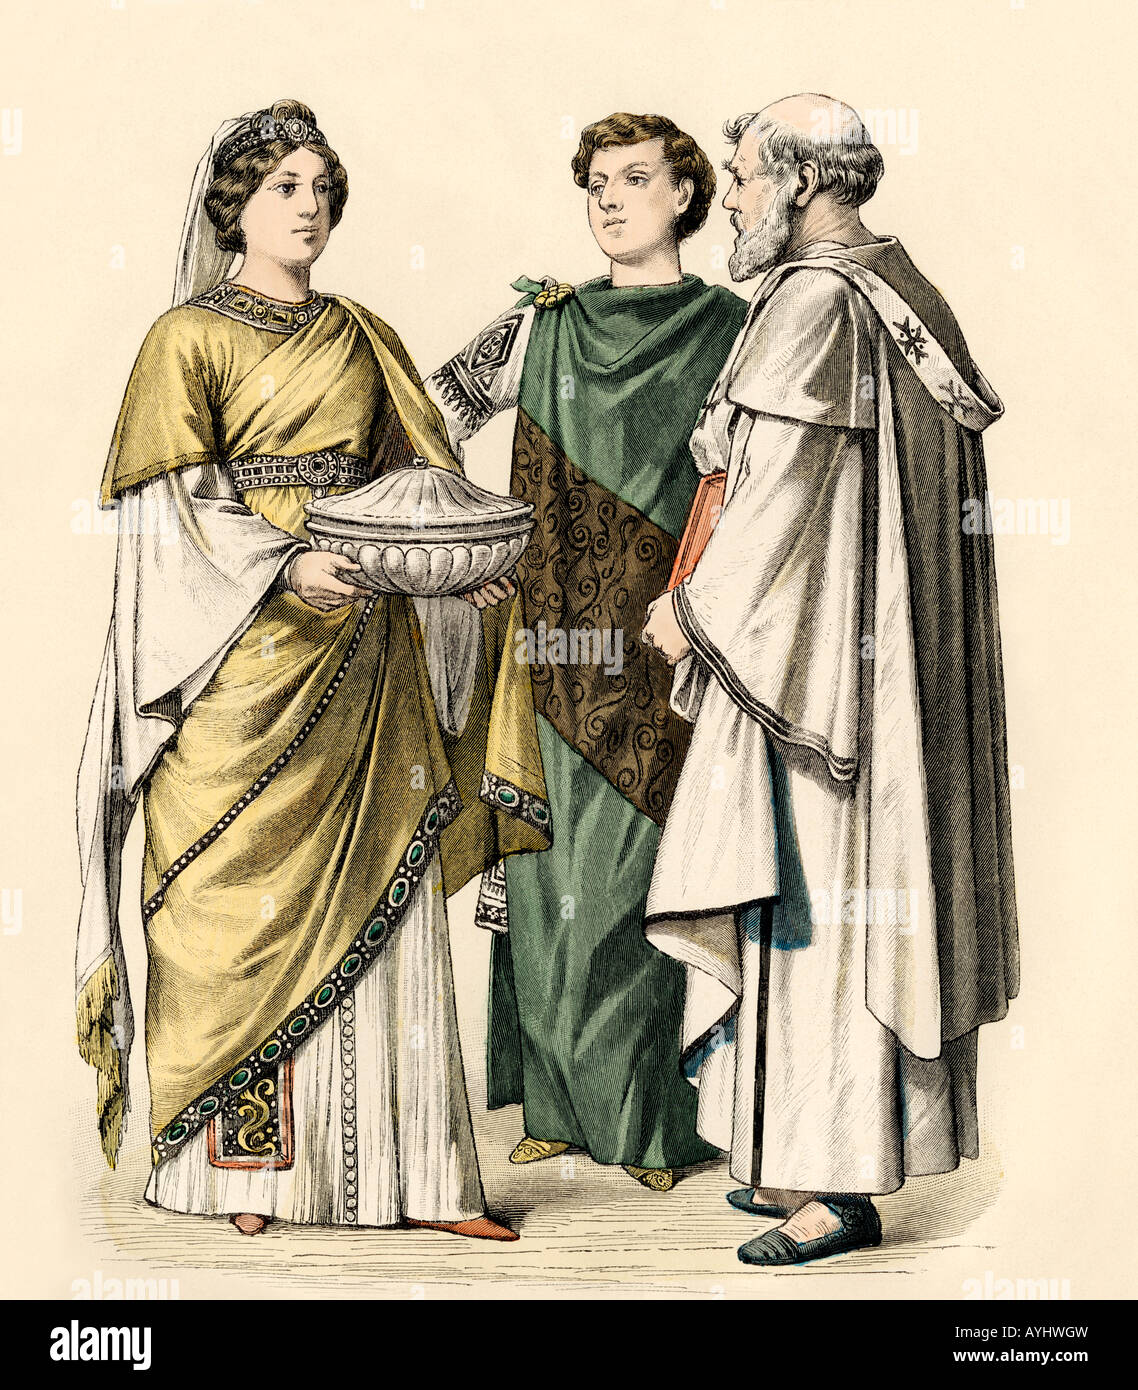 Officials of the Byzantine Empire in the sixth century AD. Hand-colored ...